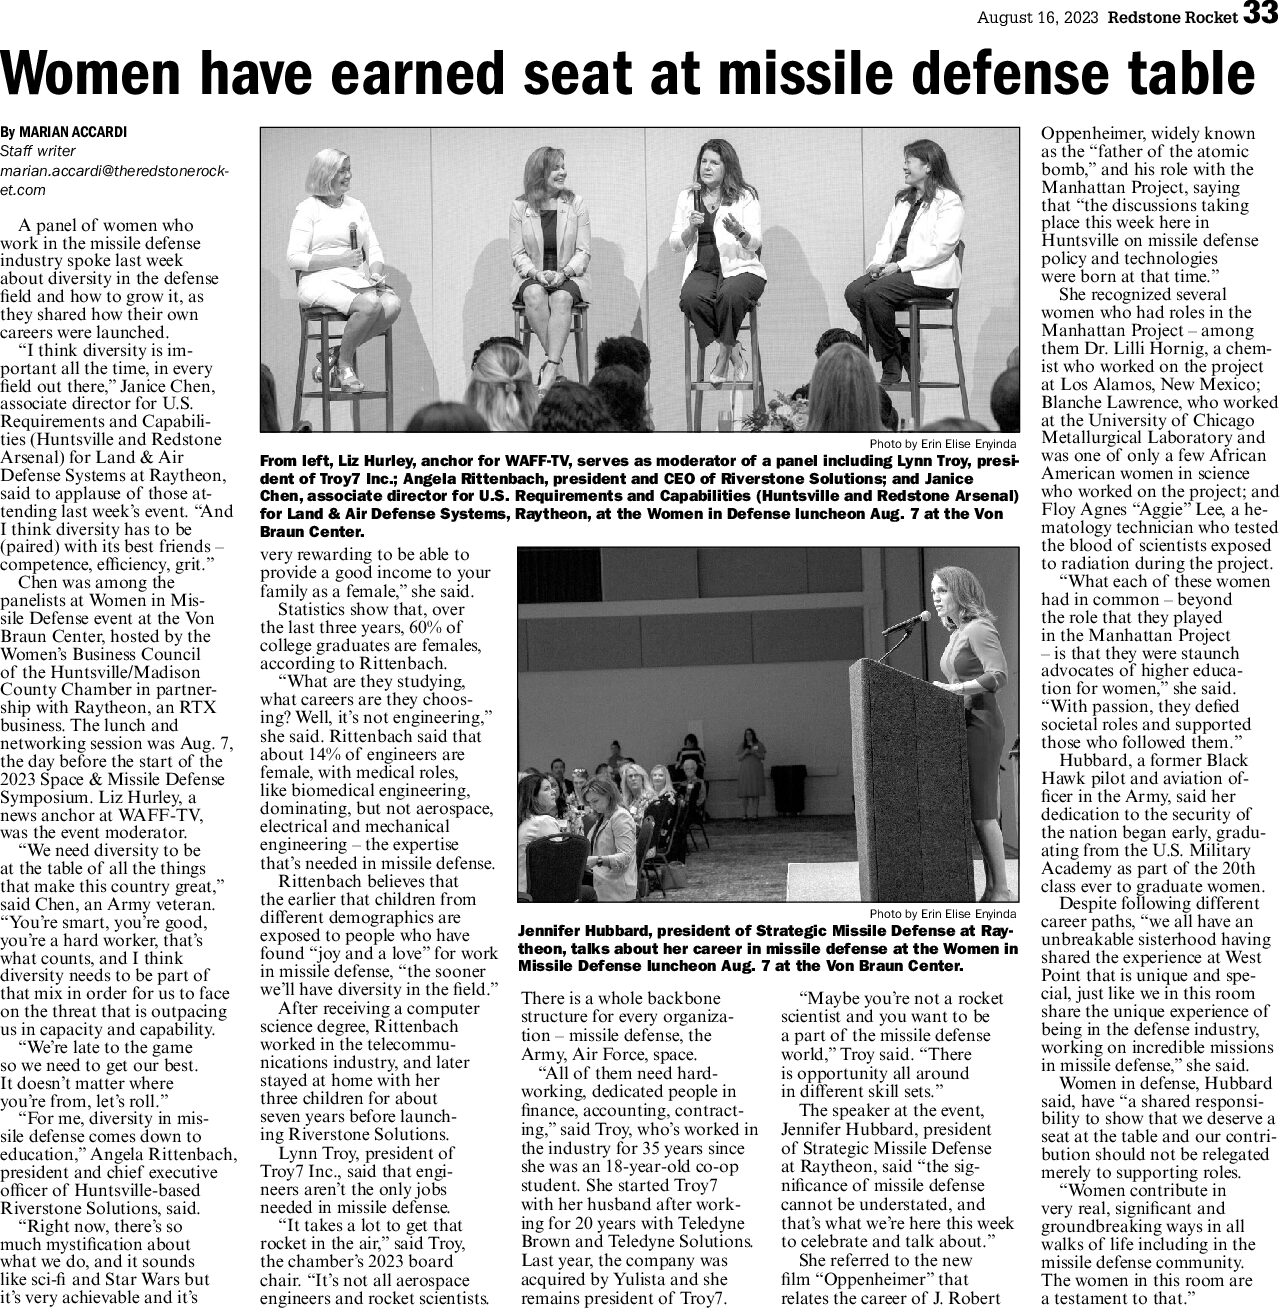 Riverstone Solutions CEO Guest Speaker for Women in Missile Defense